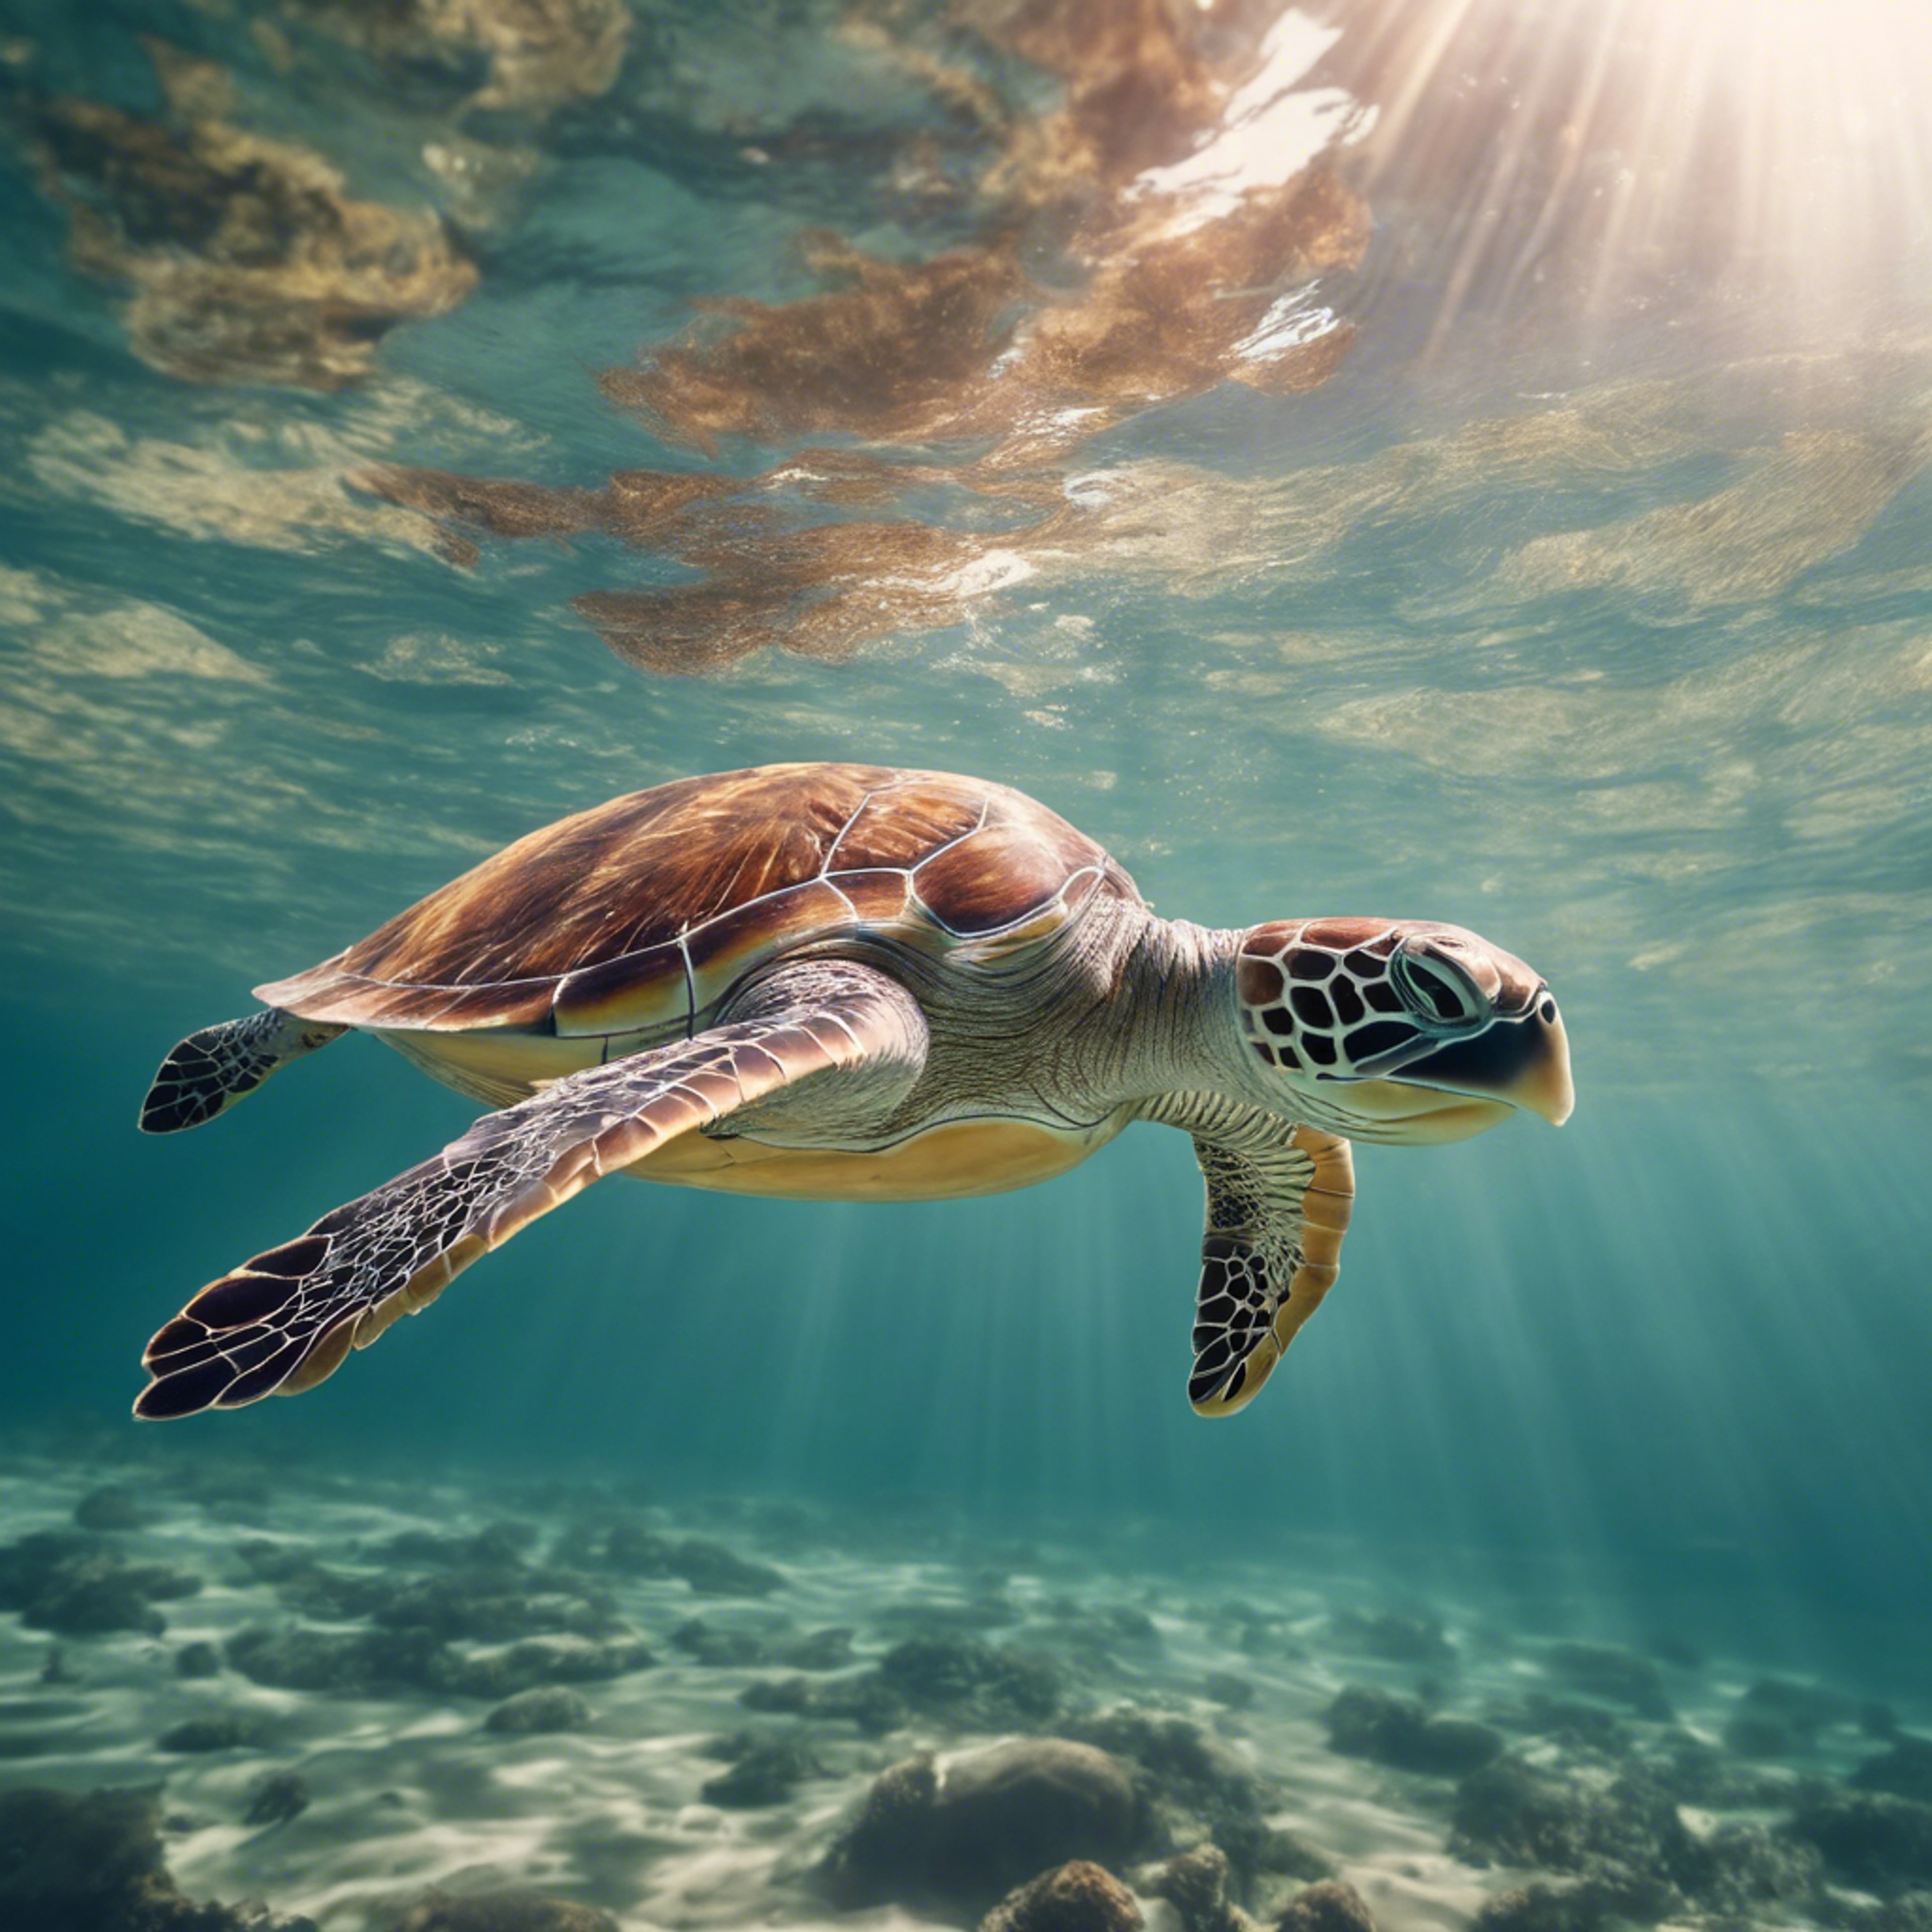 Sea turtle swimming leisurely in the ocean, with the sun penetrating the surface of the water above. Tapet[52b0564e310d4ce7b781]